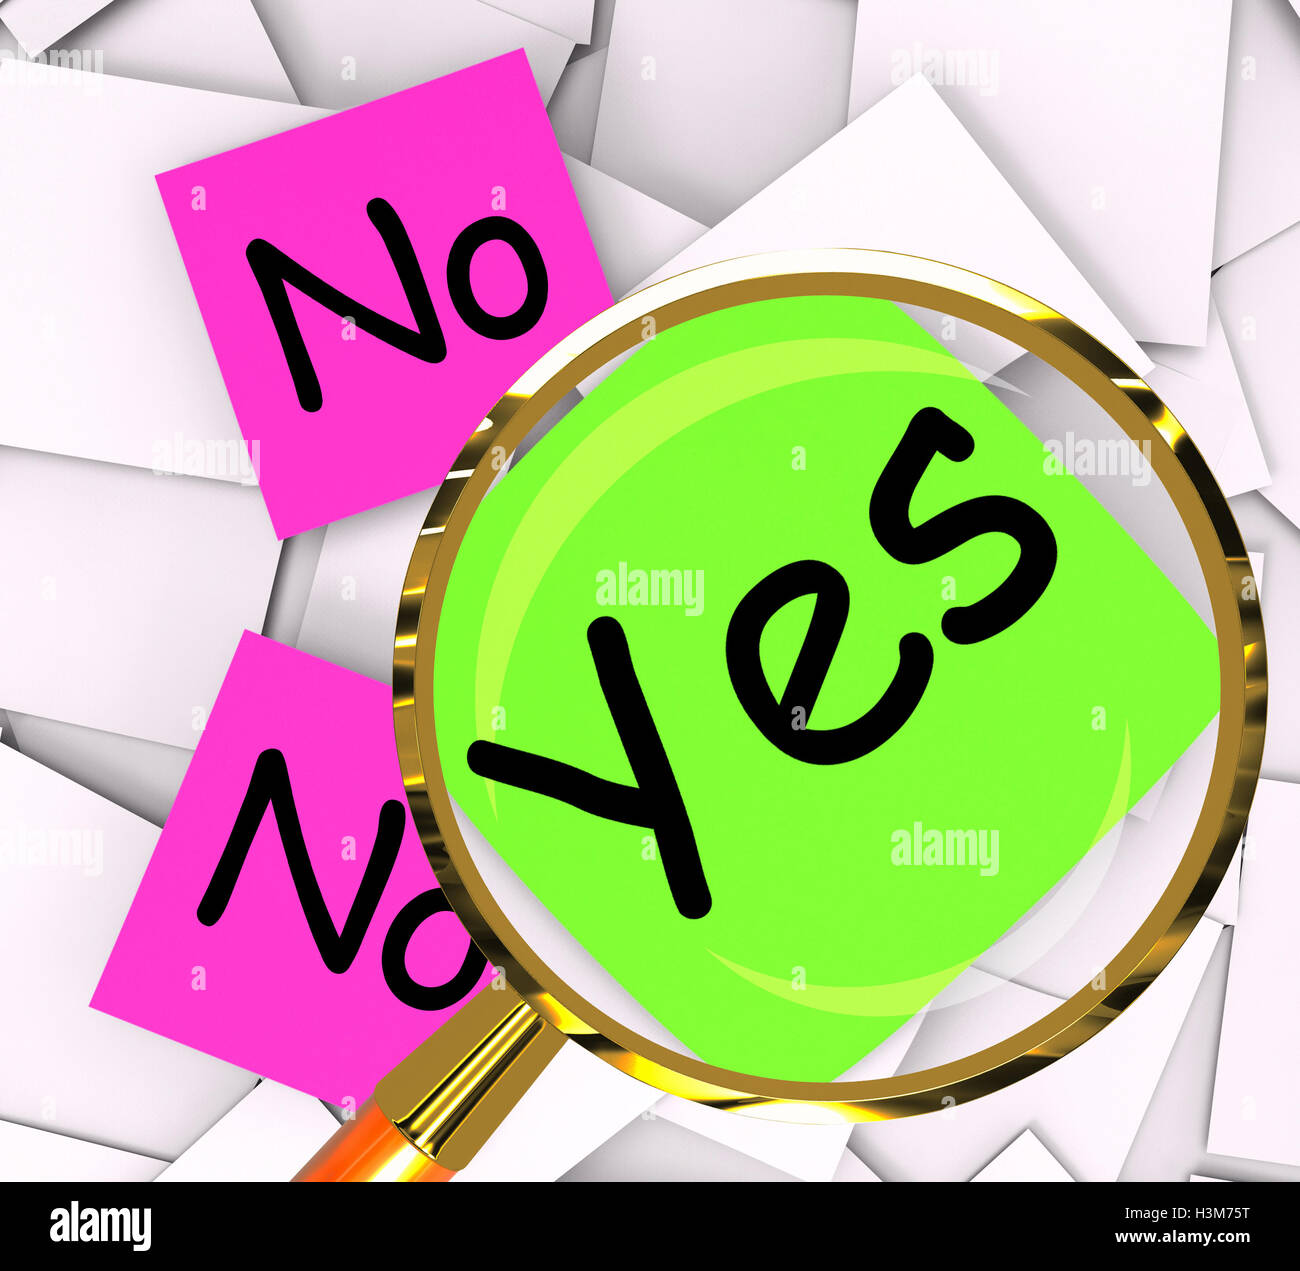 Yes No Post-It Papers Mean Answers Affirmative Or Negative Stock Photo